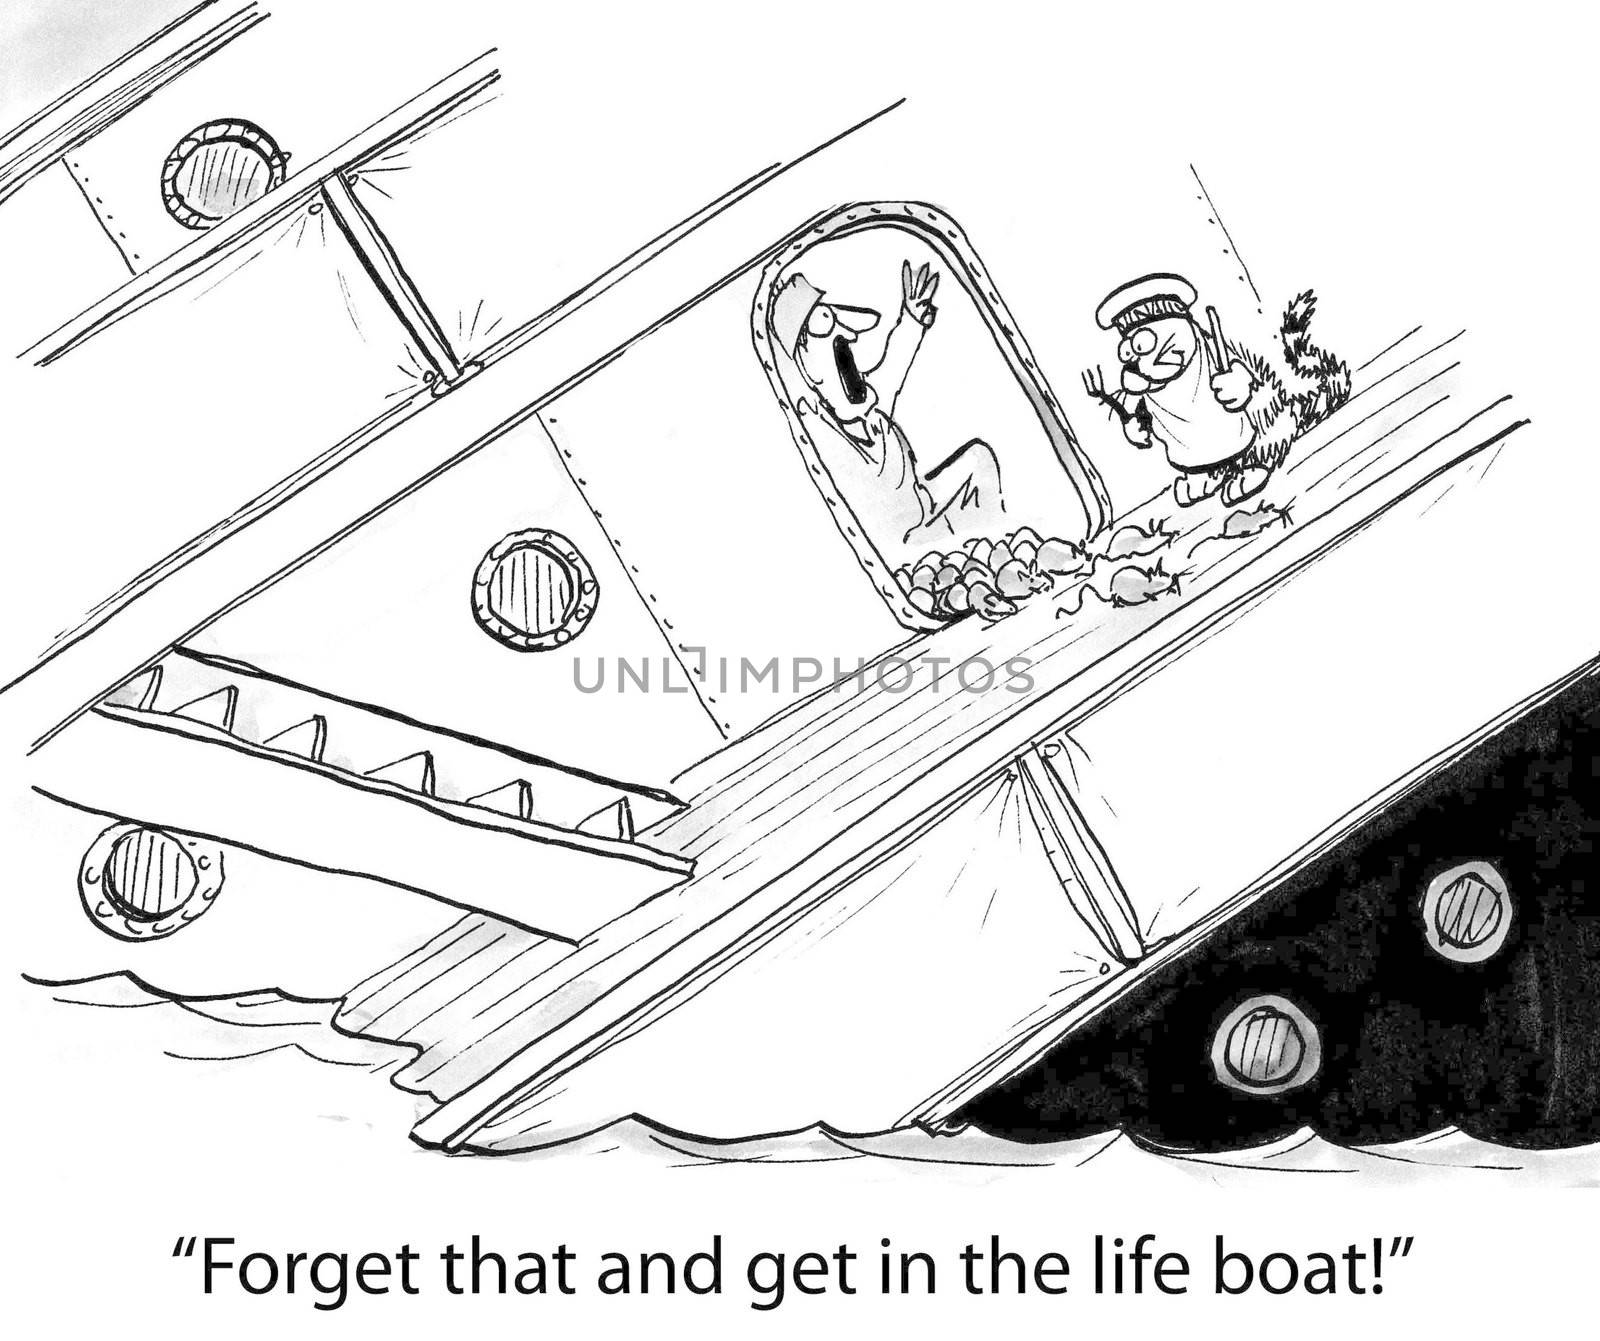 "Forget that and get in the life boat!"